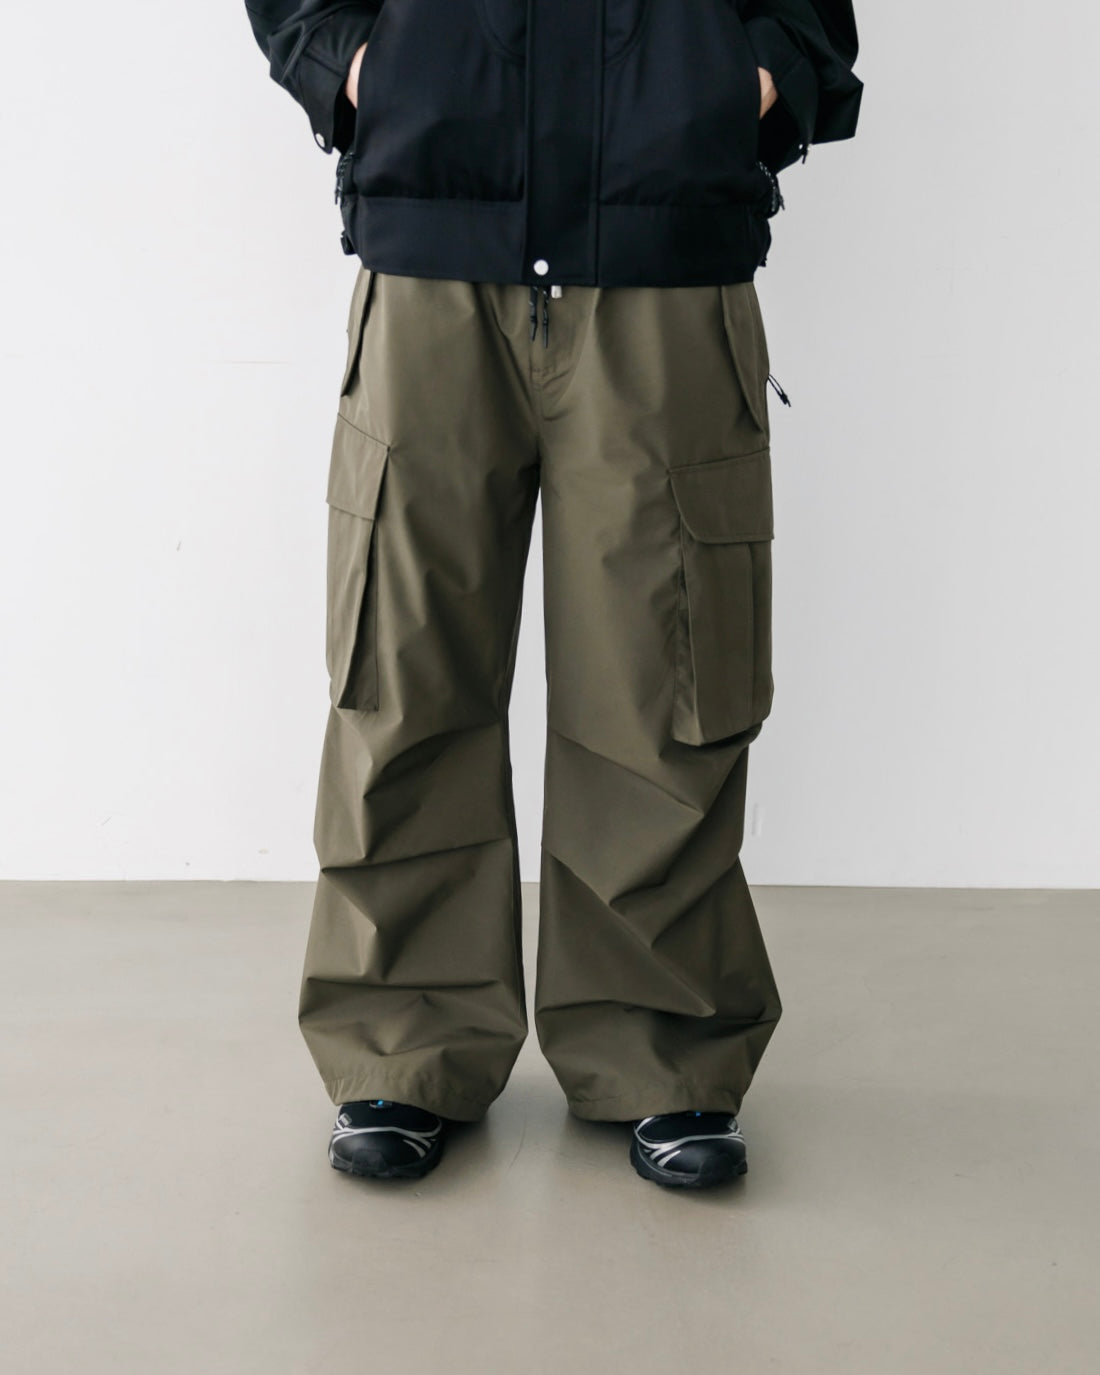 【3.6 wed 20:00- Pre-order】+phenix WINDSTOPPER® by GORE-TEX LABS CITY  MILITARY PANTS